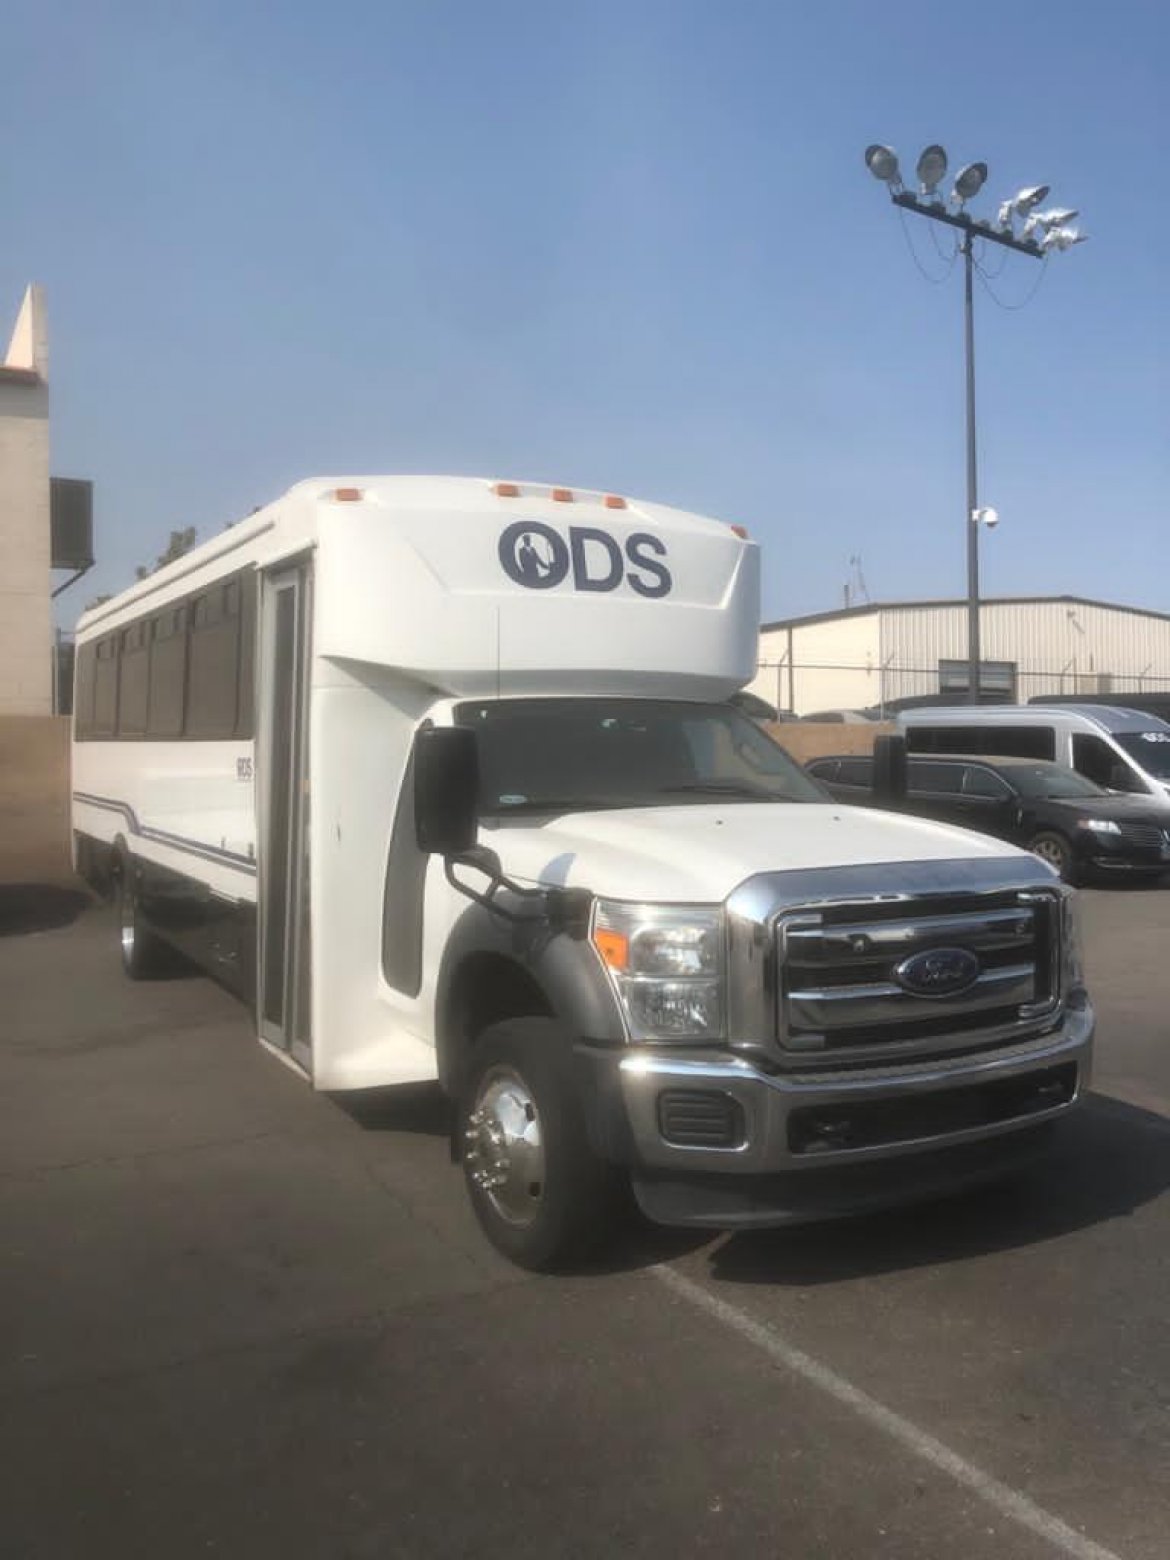 Shuttle Bus for sale: 2015 Ford F-550 by Glaval Coach Builder